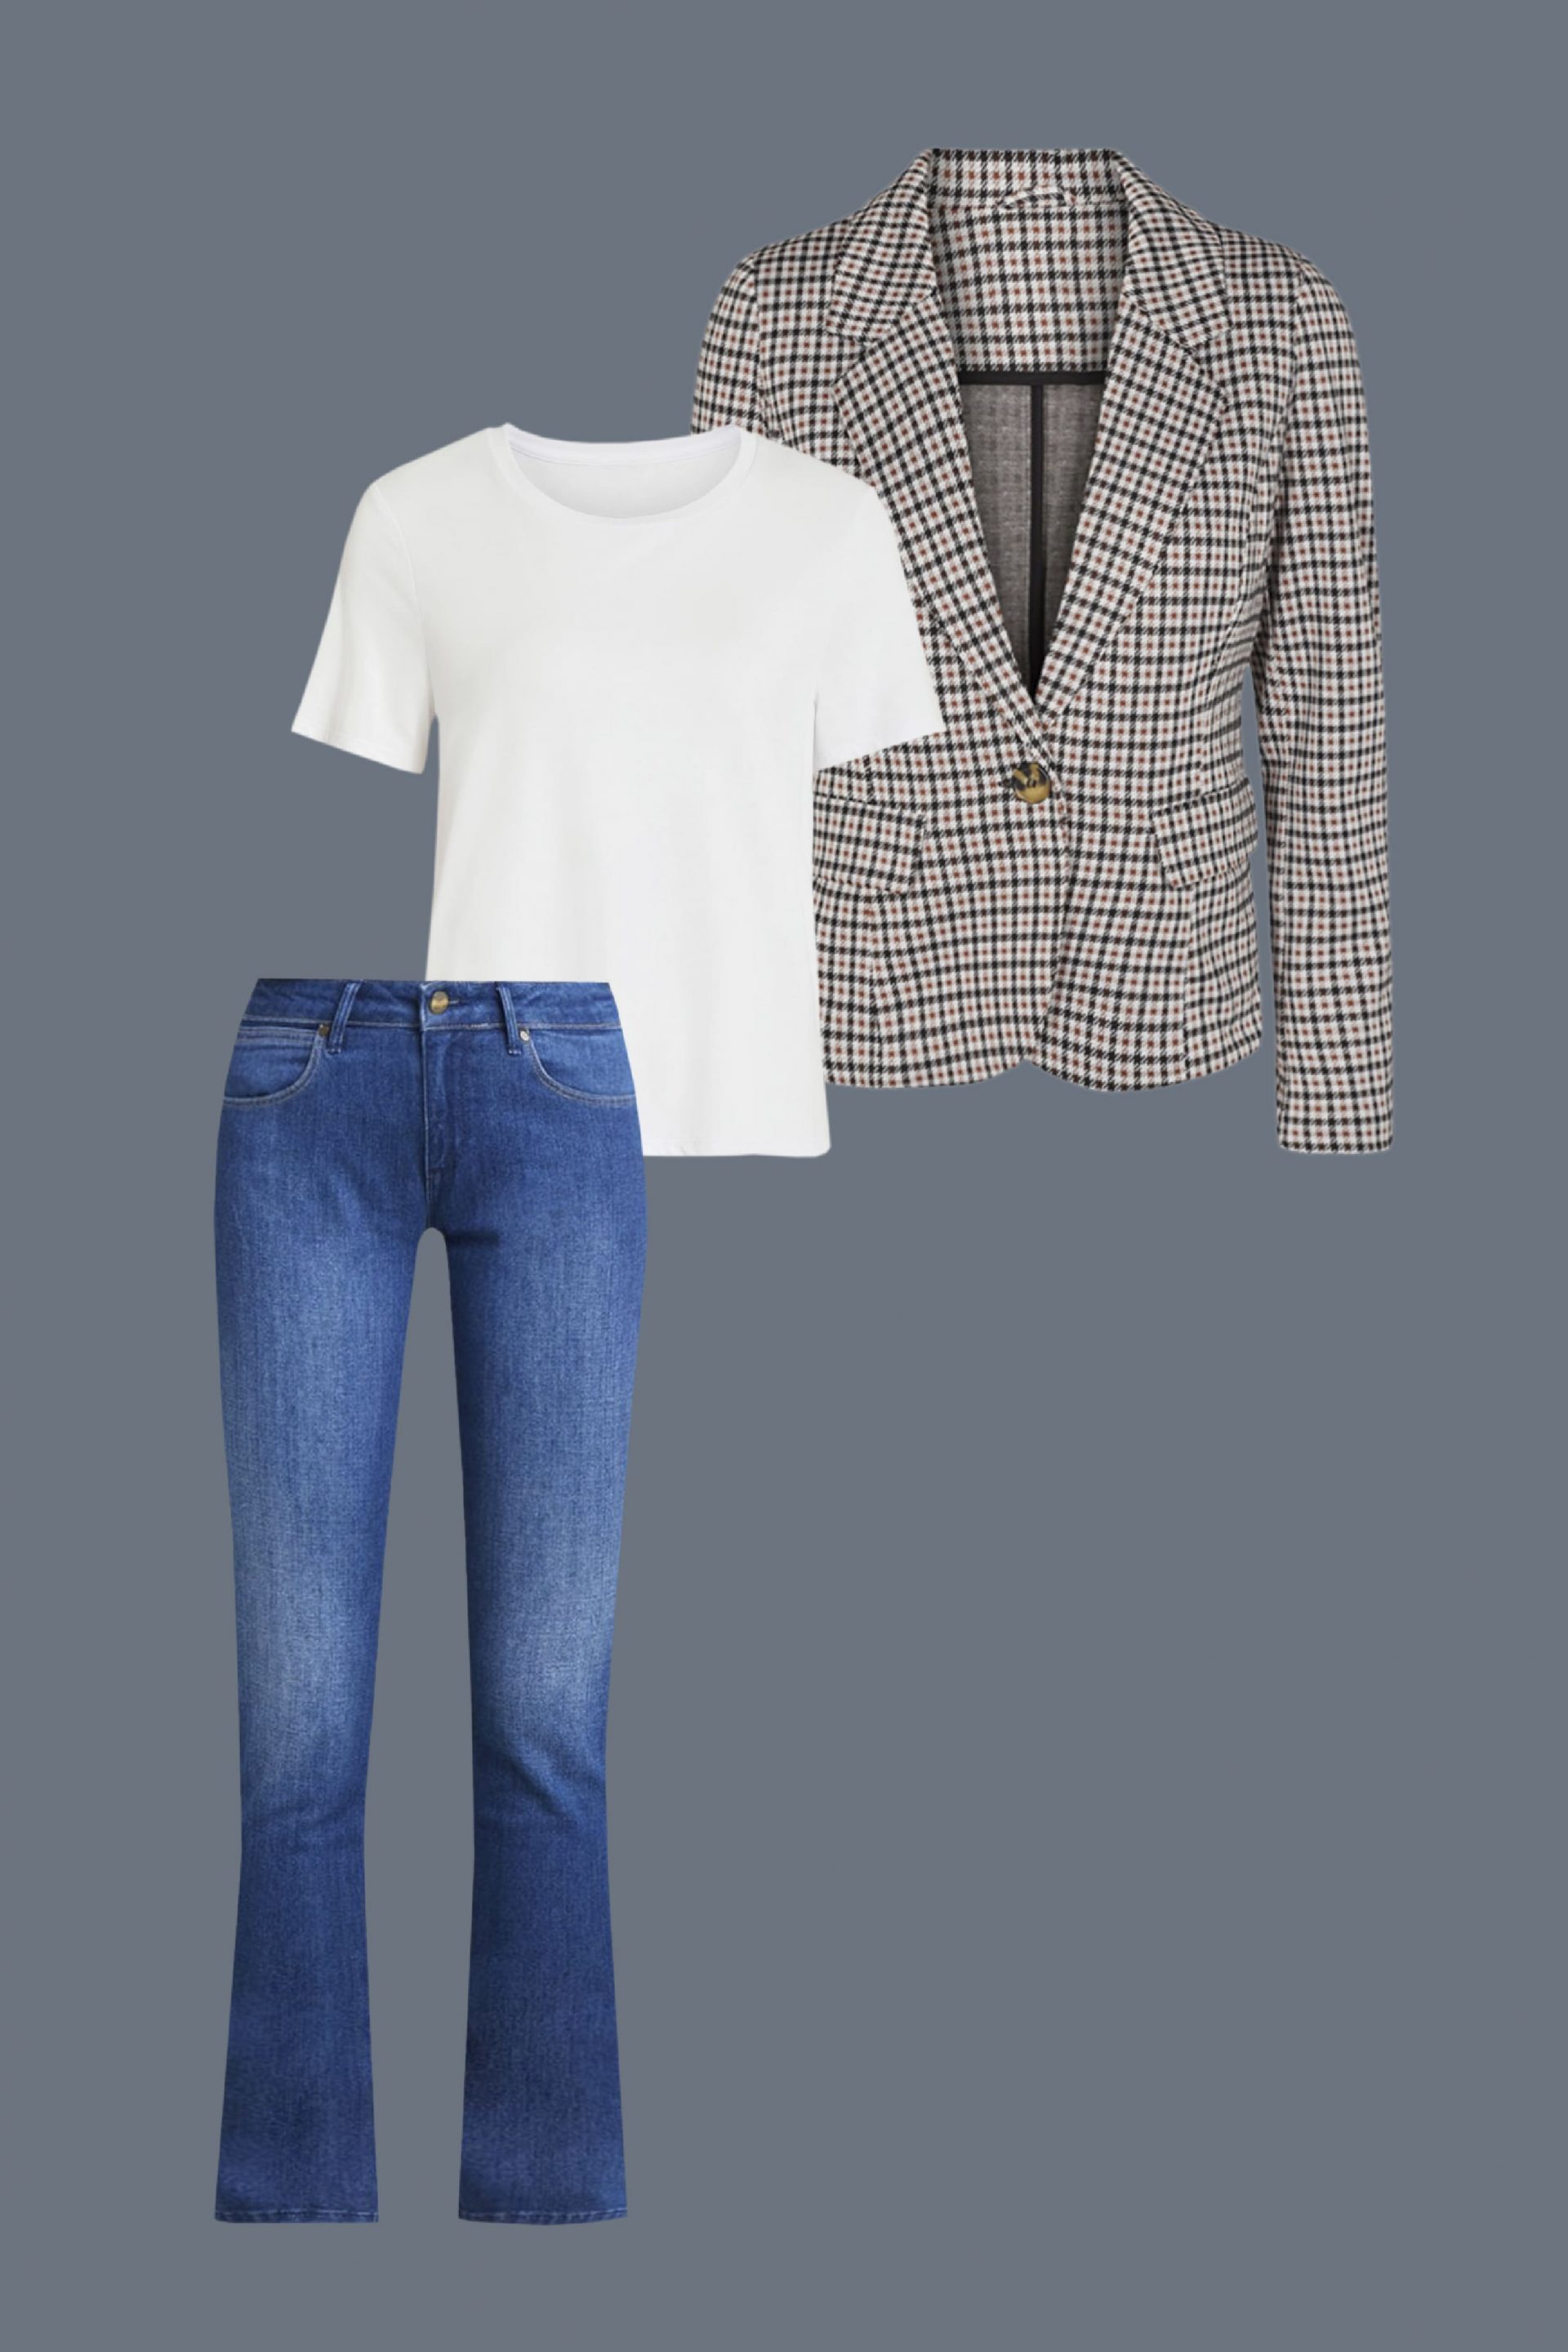 checked blazer with jeans and t-shirt